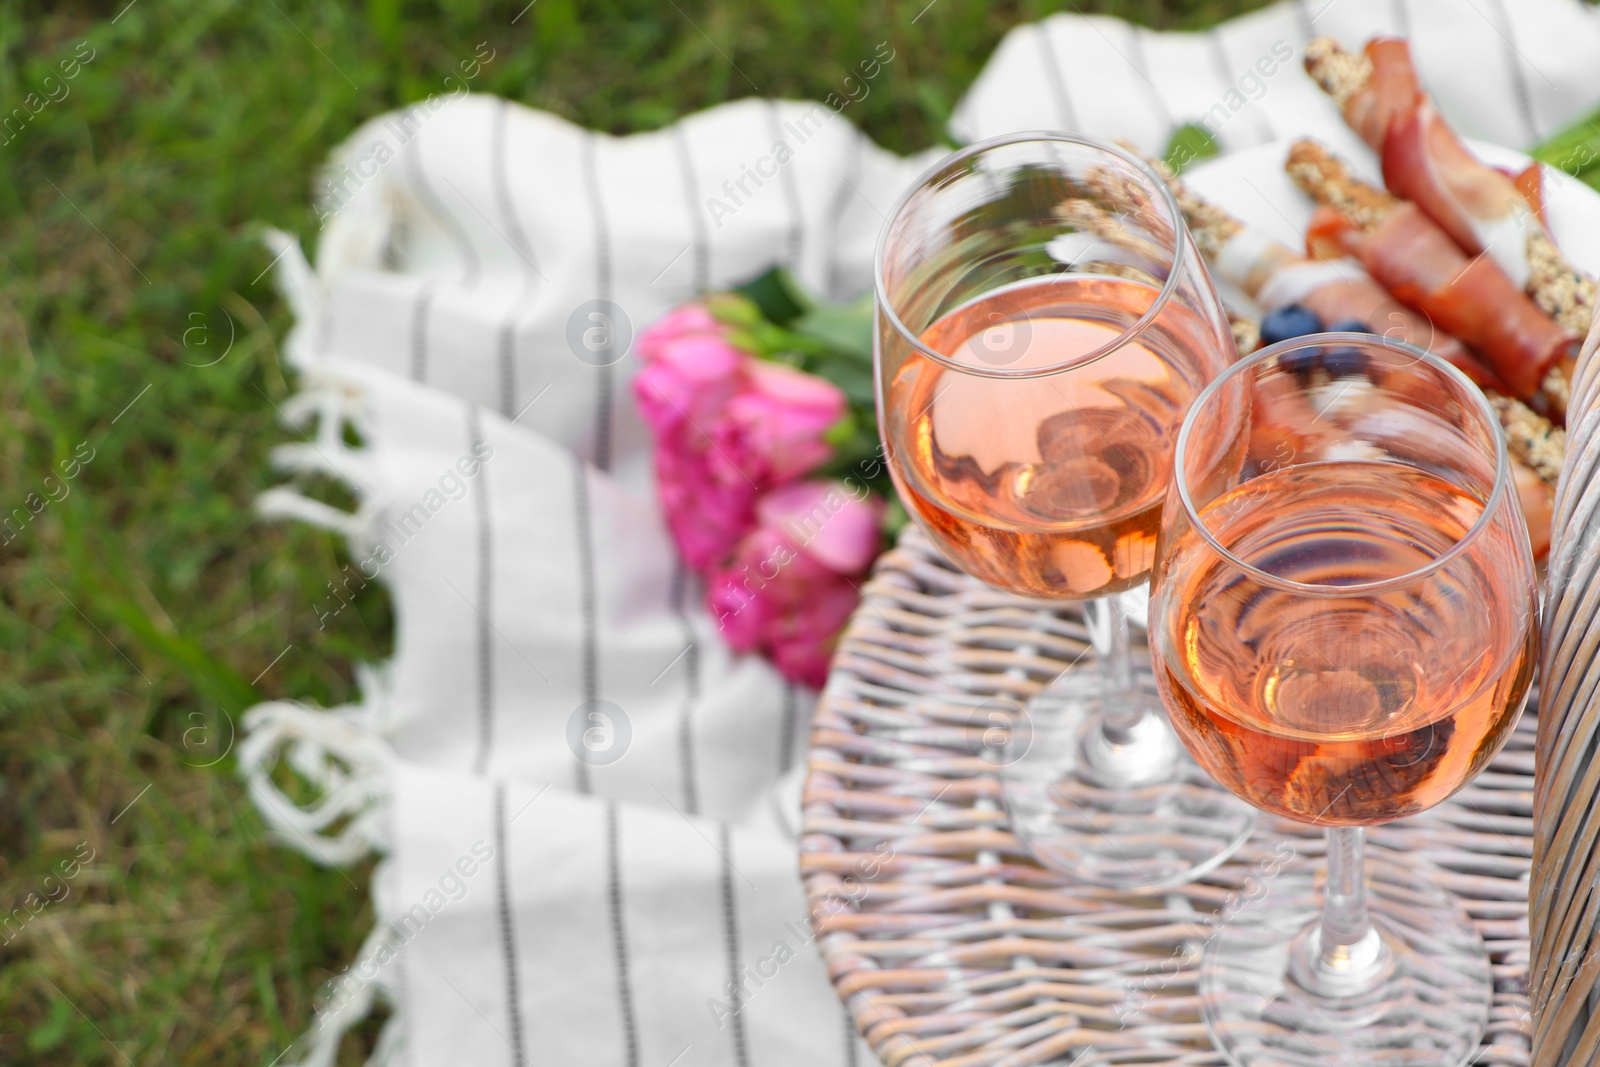 Photo of Glasses of delicious rose wine, food, flowers and basket on picnic blanket outdoors, closeup